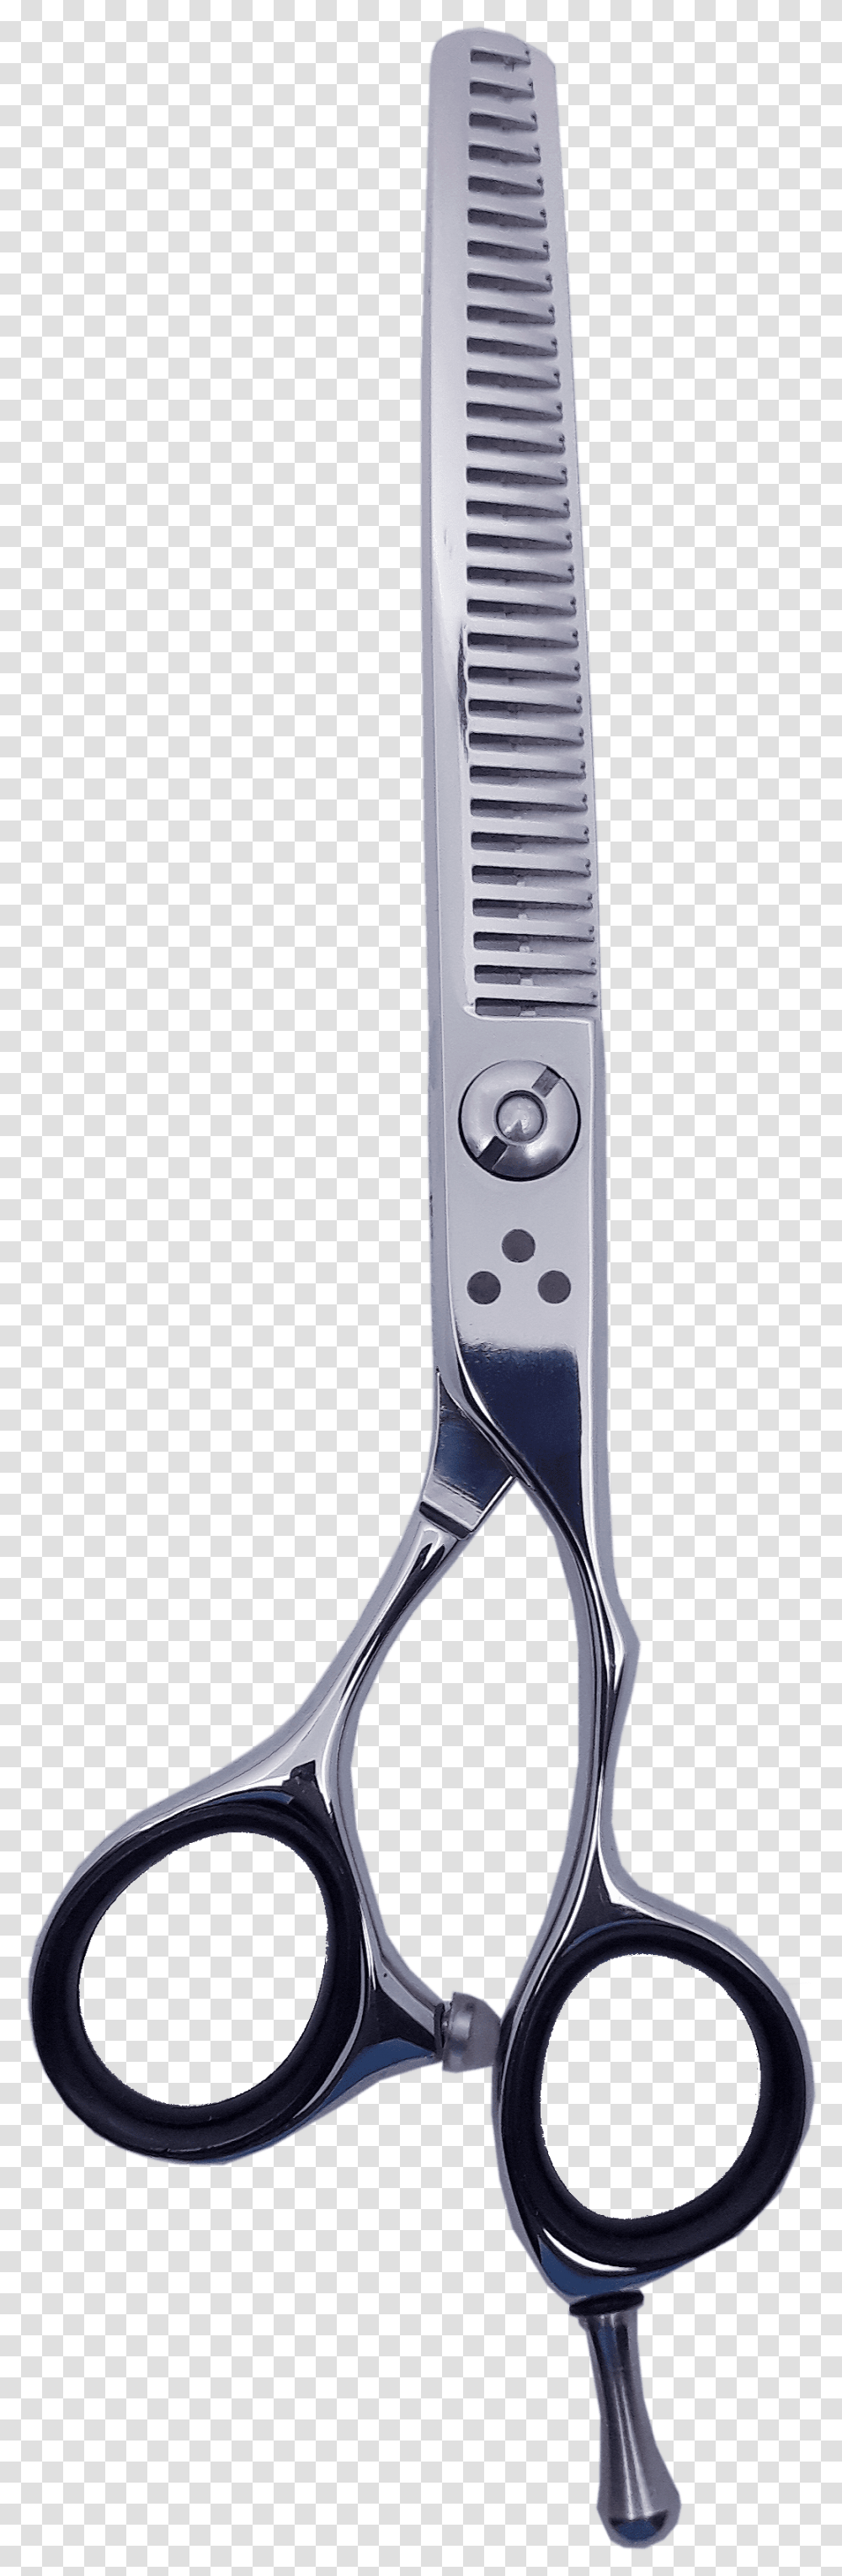 Shear, Scissors, Blade, Weapon, Weaponry Transparent Png